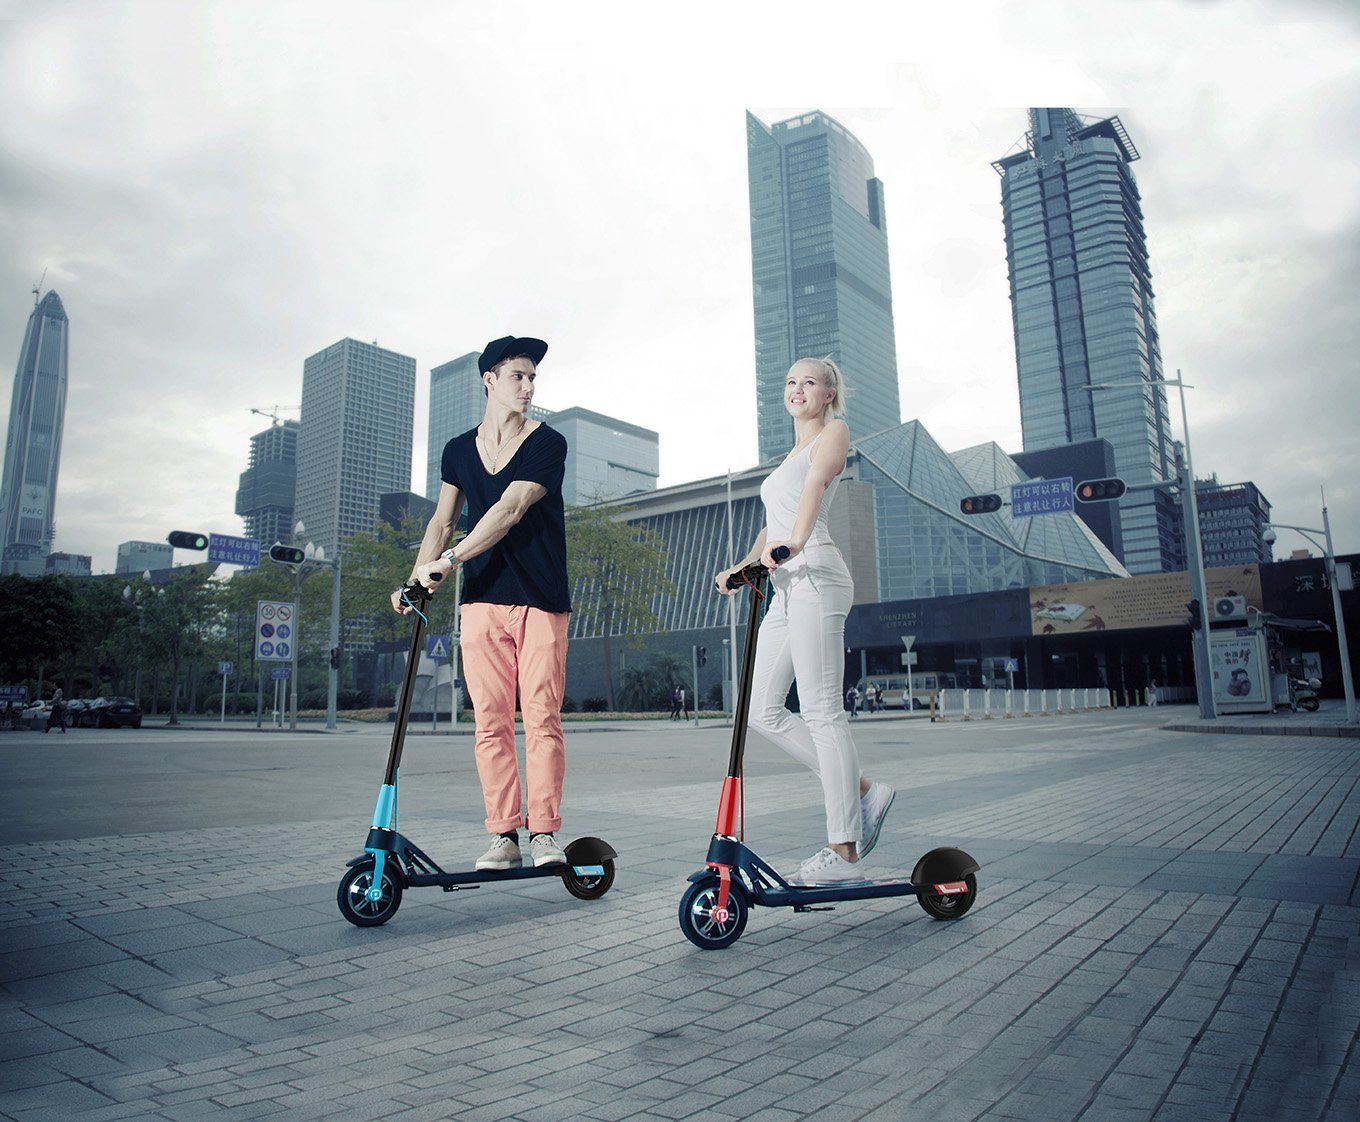 With the LIME Electric Scooter craze hitting New Zealand - if I want to buy a scooter, what do I need to know?